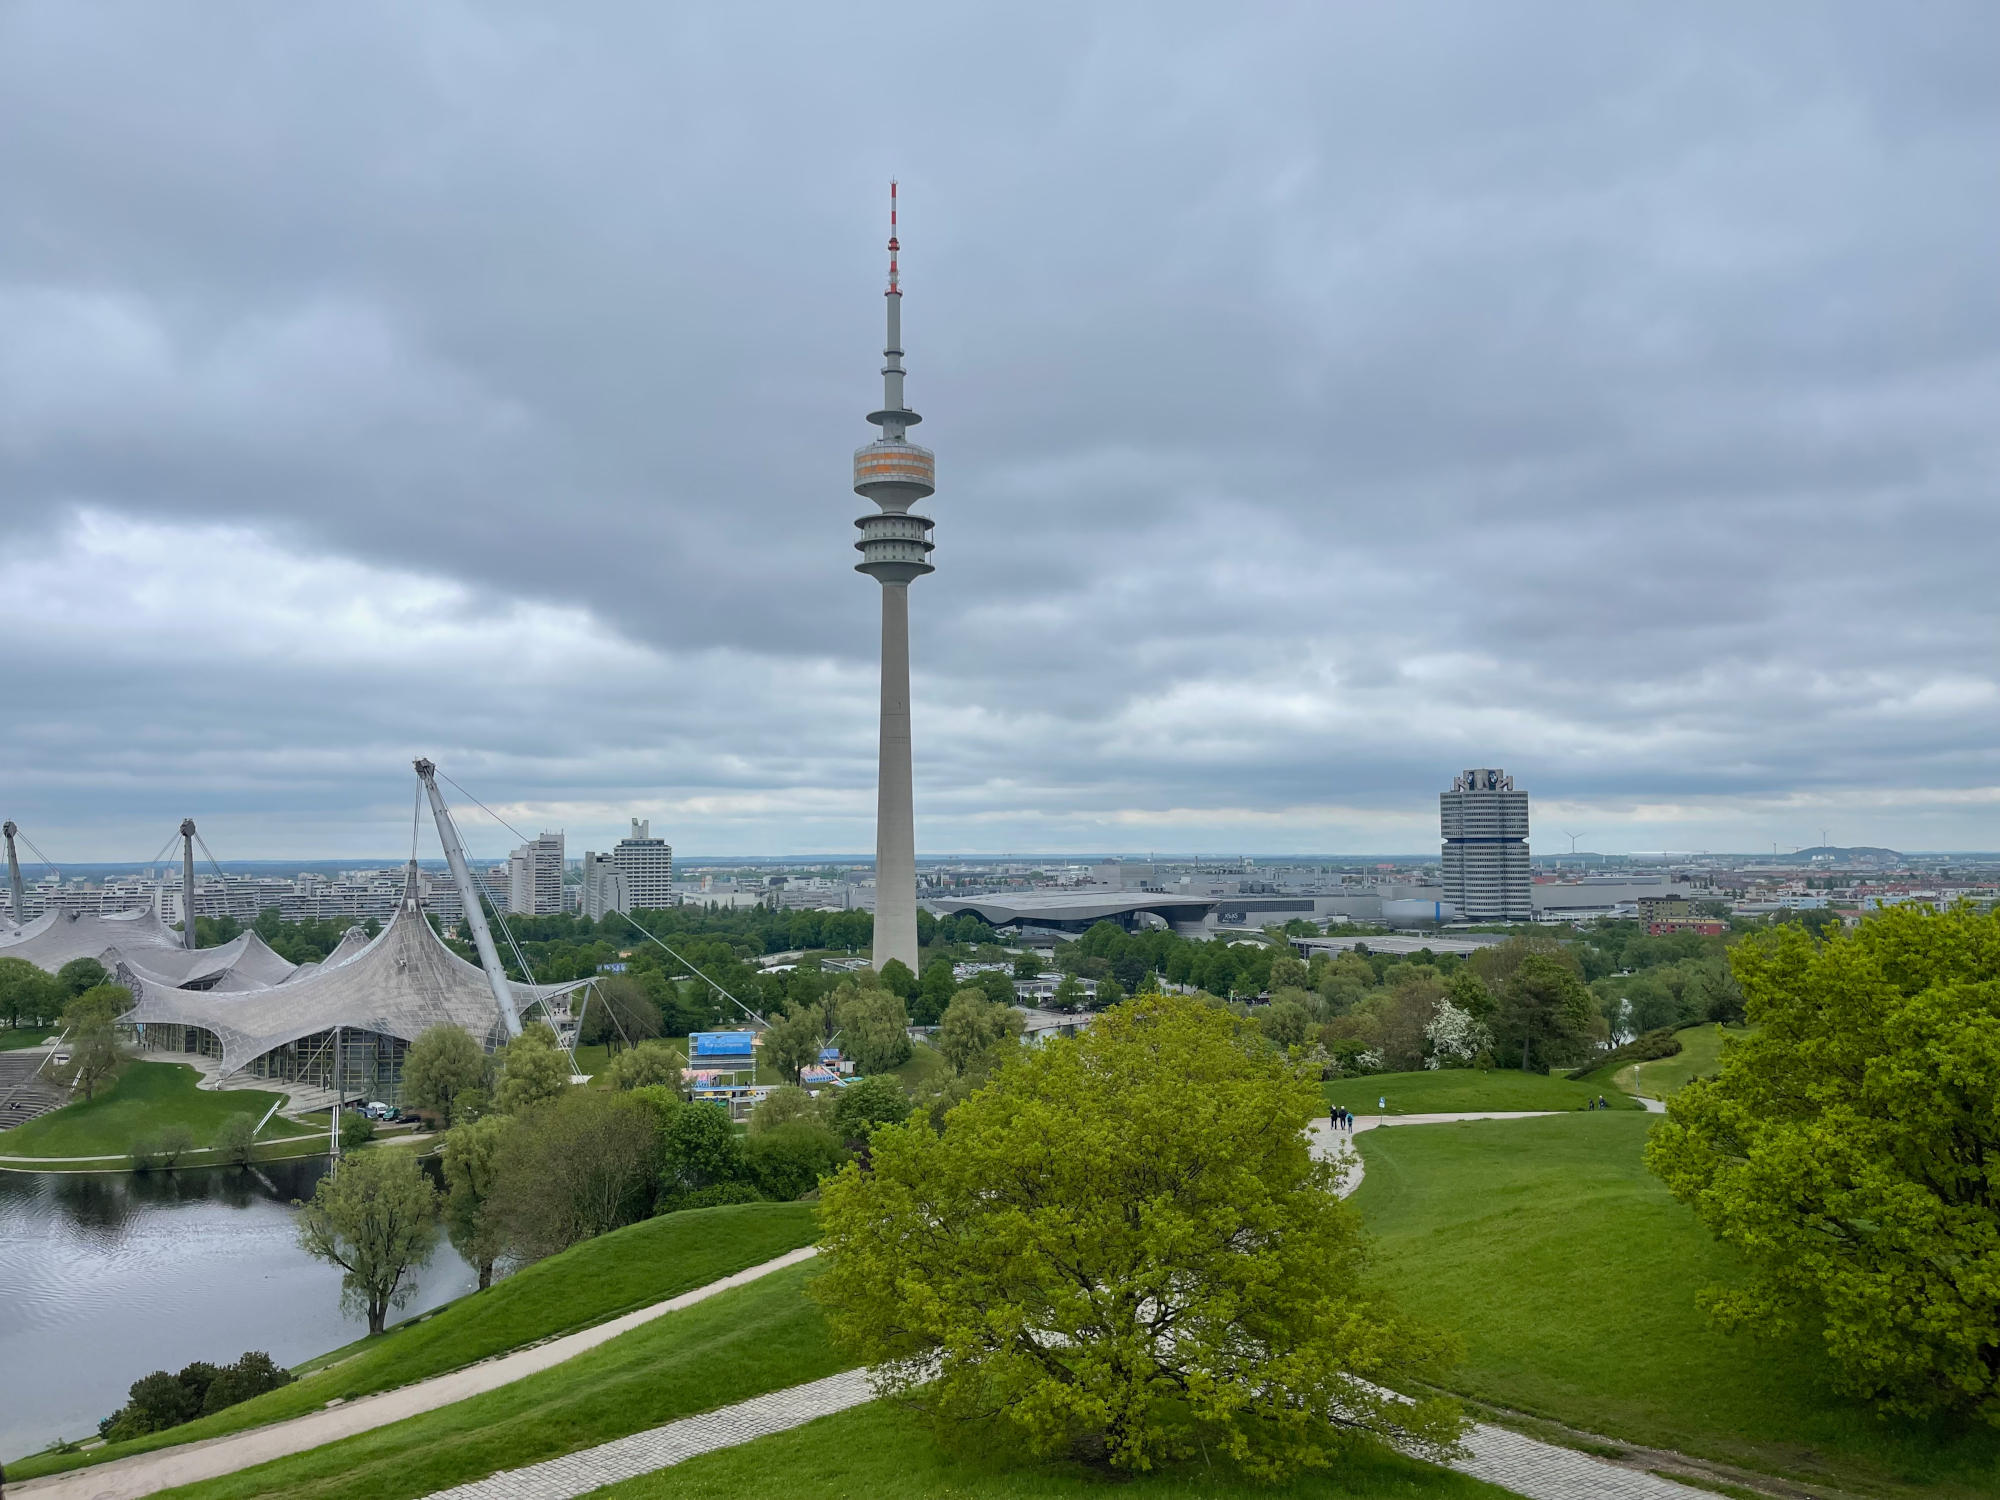 The Olympiapark München on a very cloudy day.